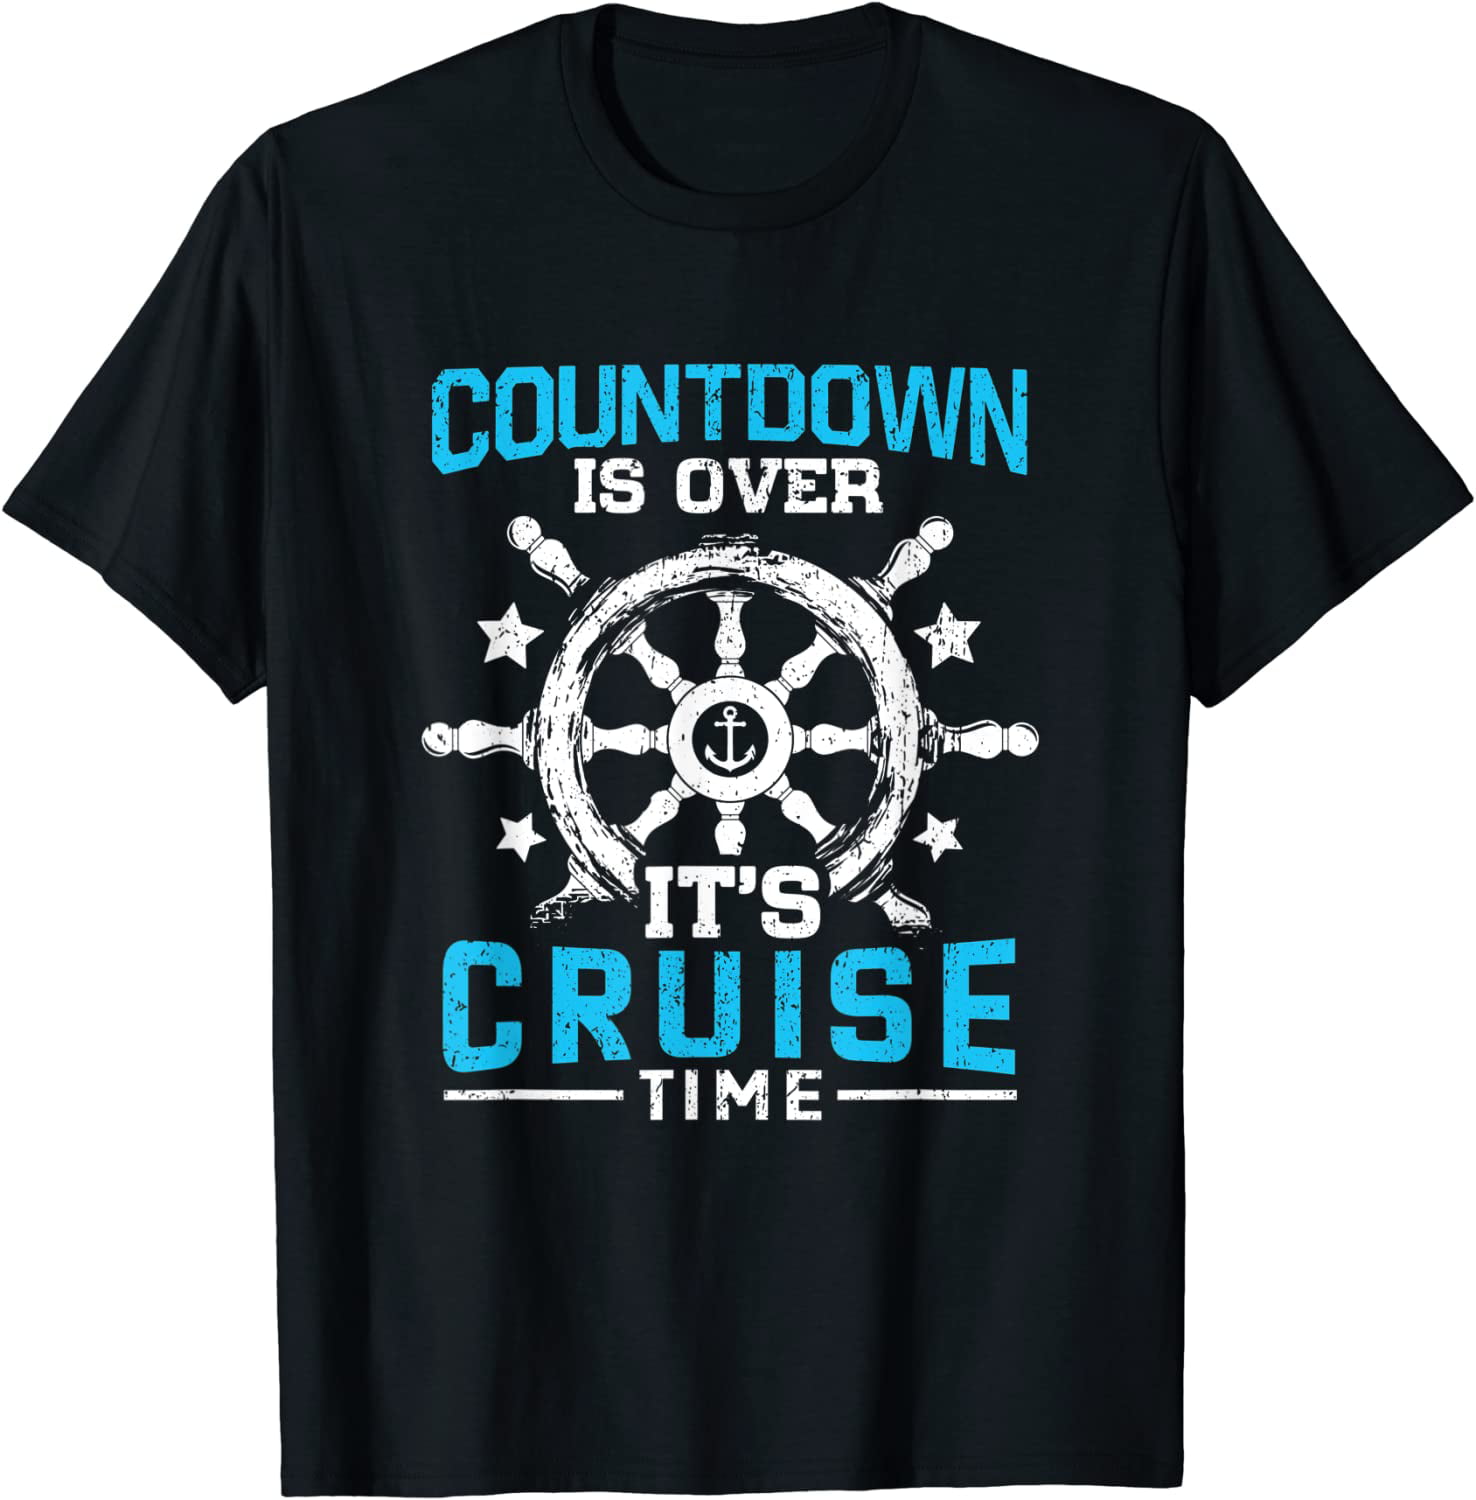 Countdown Is Over It's Cruise Time Funny Boat Cruising T-Shirt ...